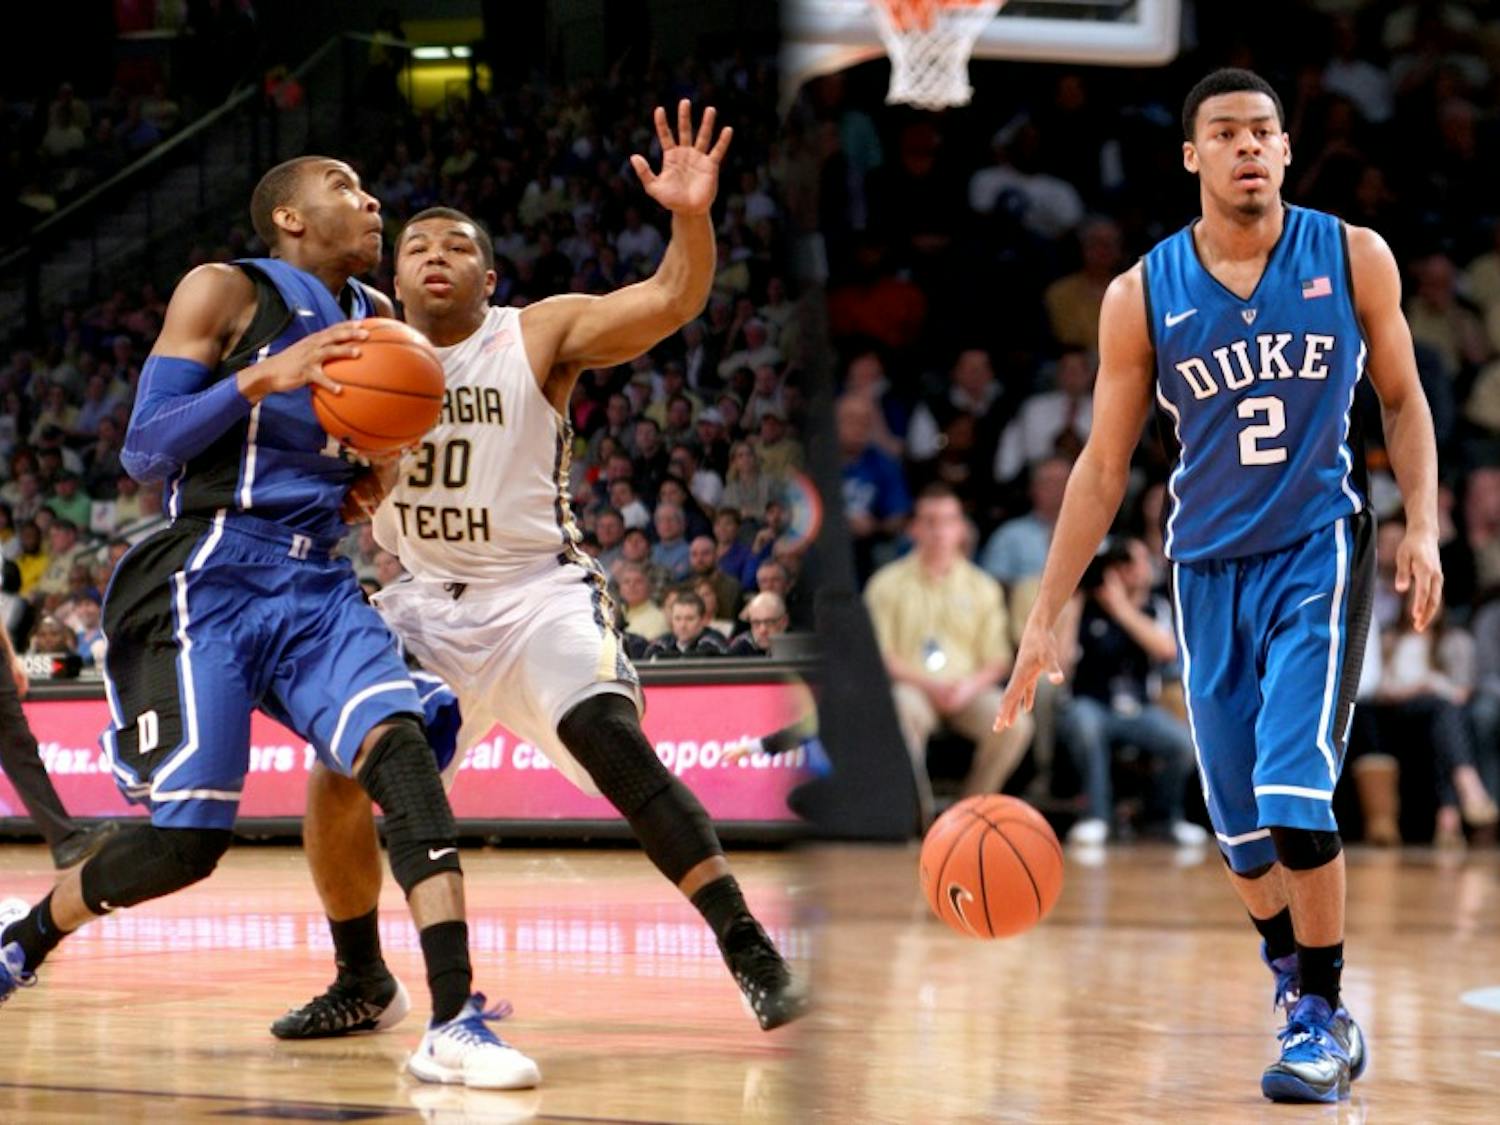 Rasheed Sulaimon and Quinn Cook have split the starting spot in the last eight games, and Duke has benefitted from keeping opponents guessing.